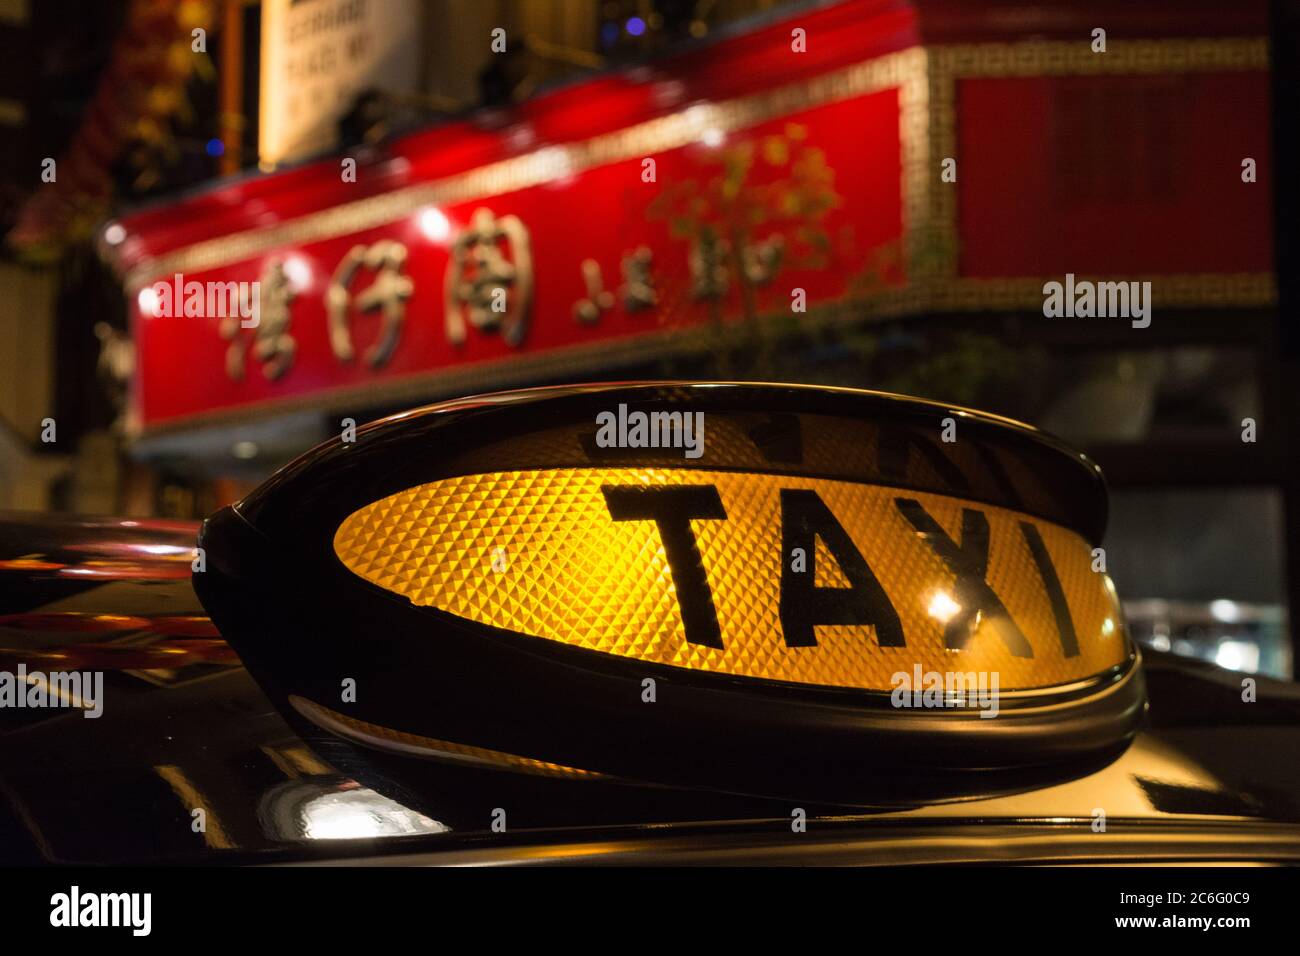 The iconic black taxi cab for-hire sign in Chinatown, Soho, Central London, UK Stock Photo